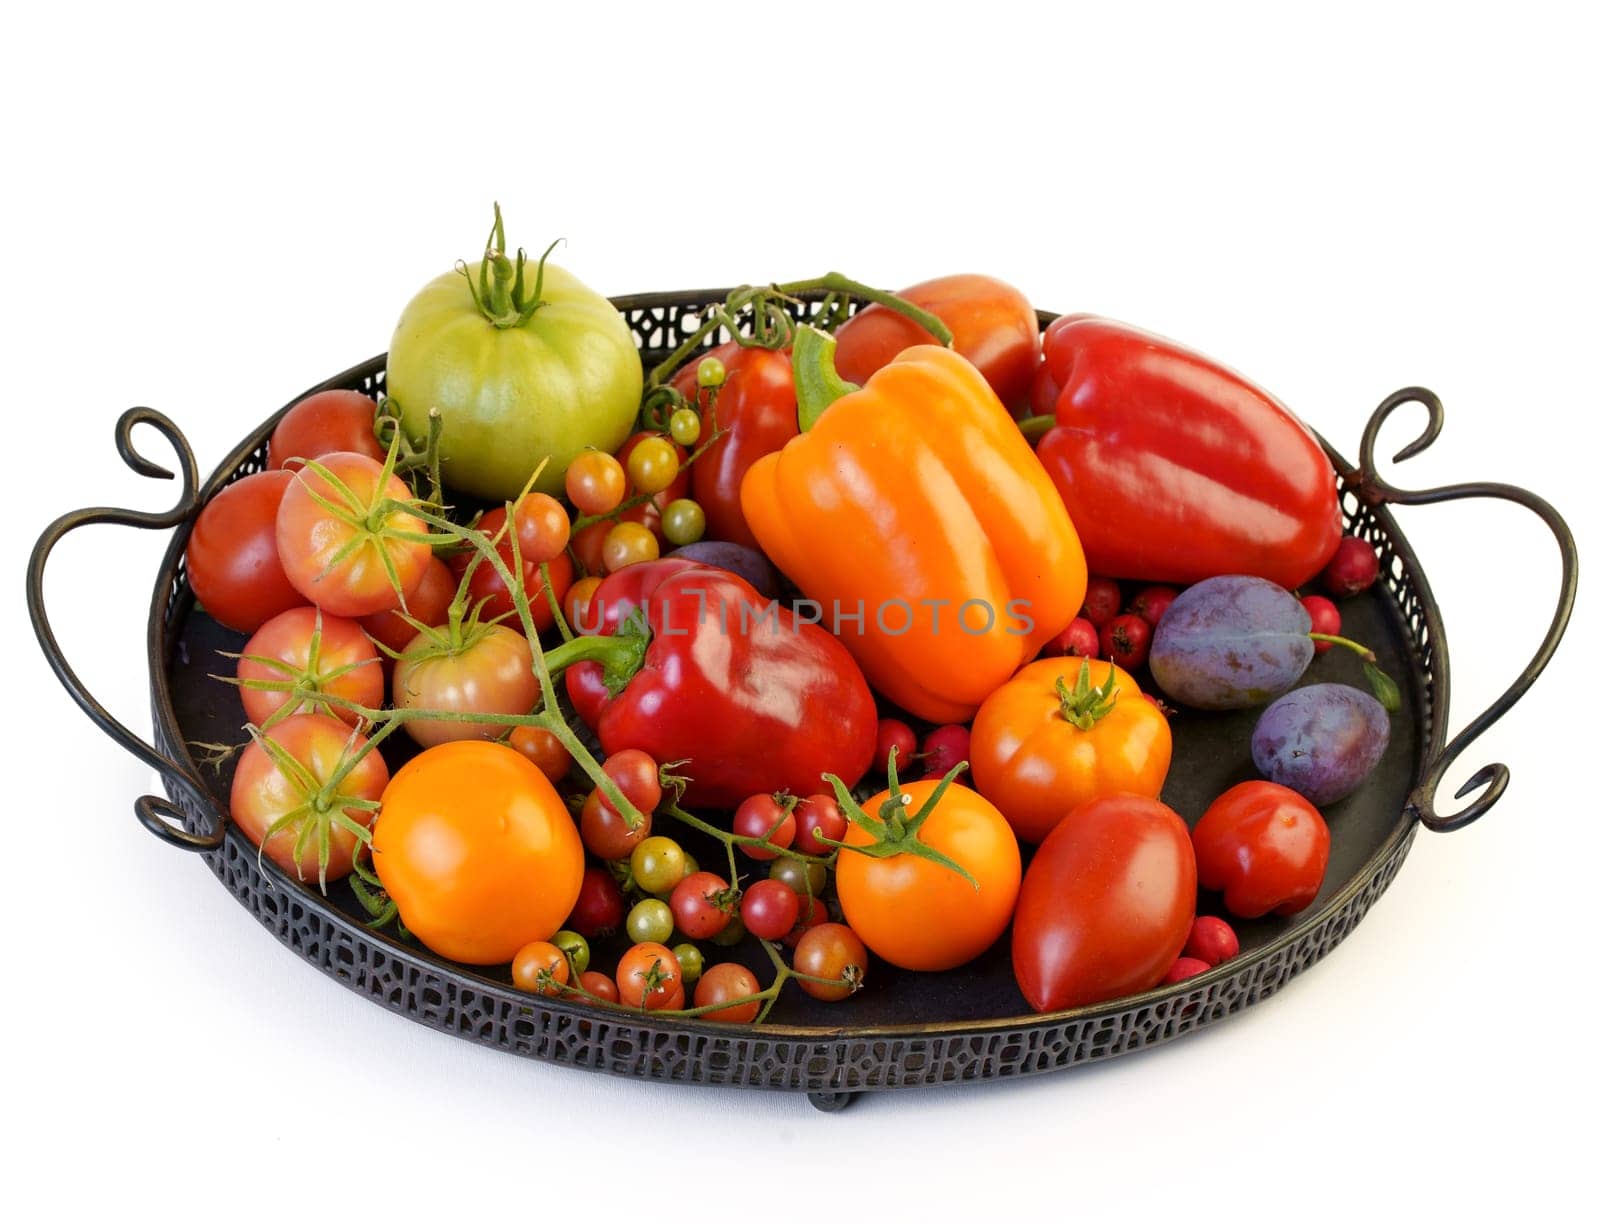 Tomatoes of various varieties and sizes on an iron tray on a wooden table. by aprilphoto